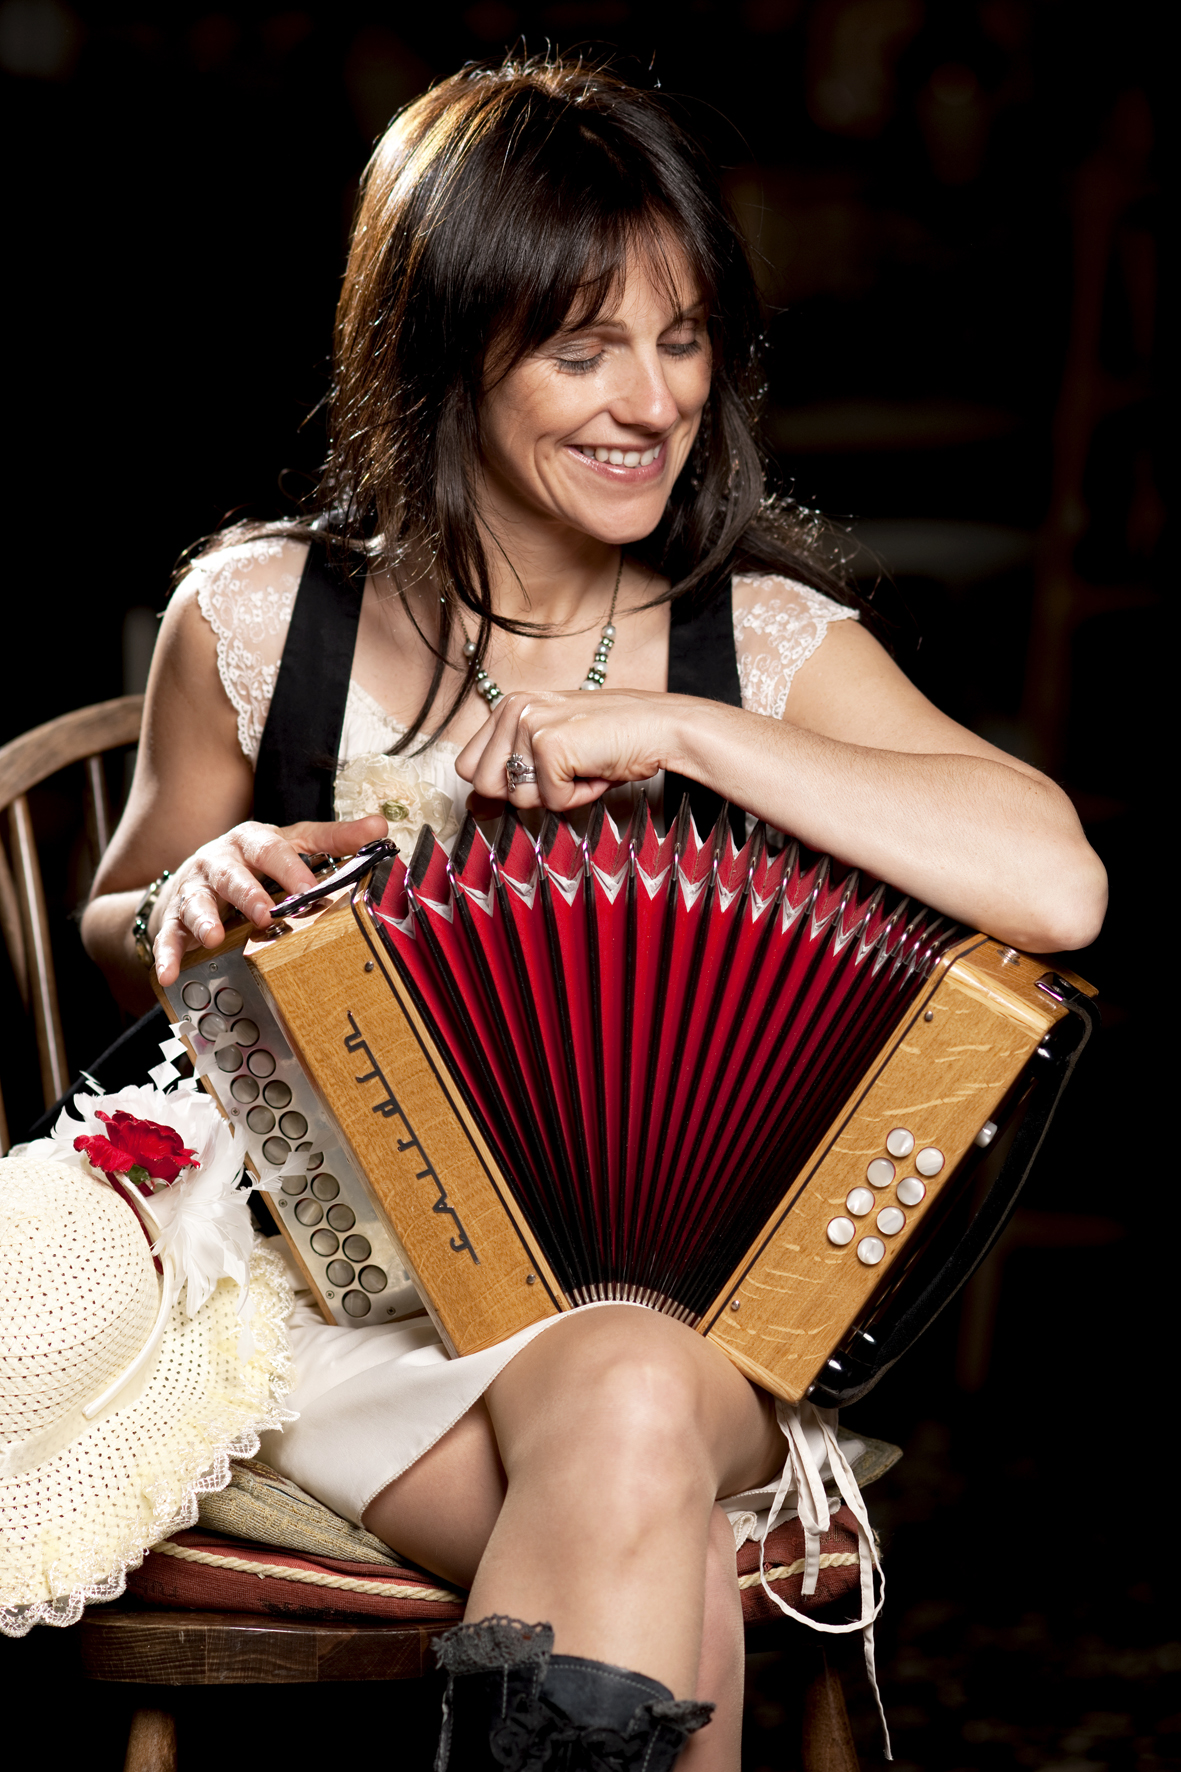 ‘GALWAY GIRL’ SHARON SHANNON & BAND COMING TO DENVER MARCH 9!